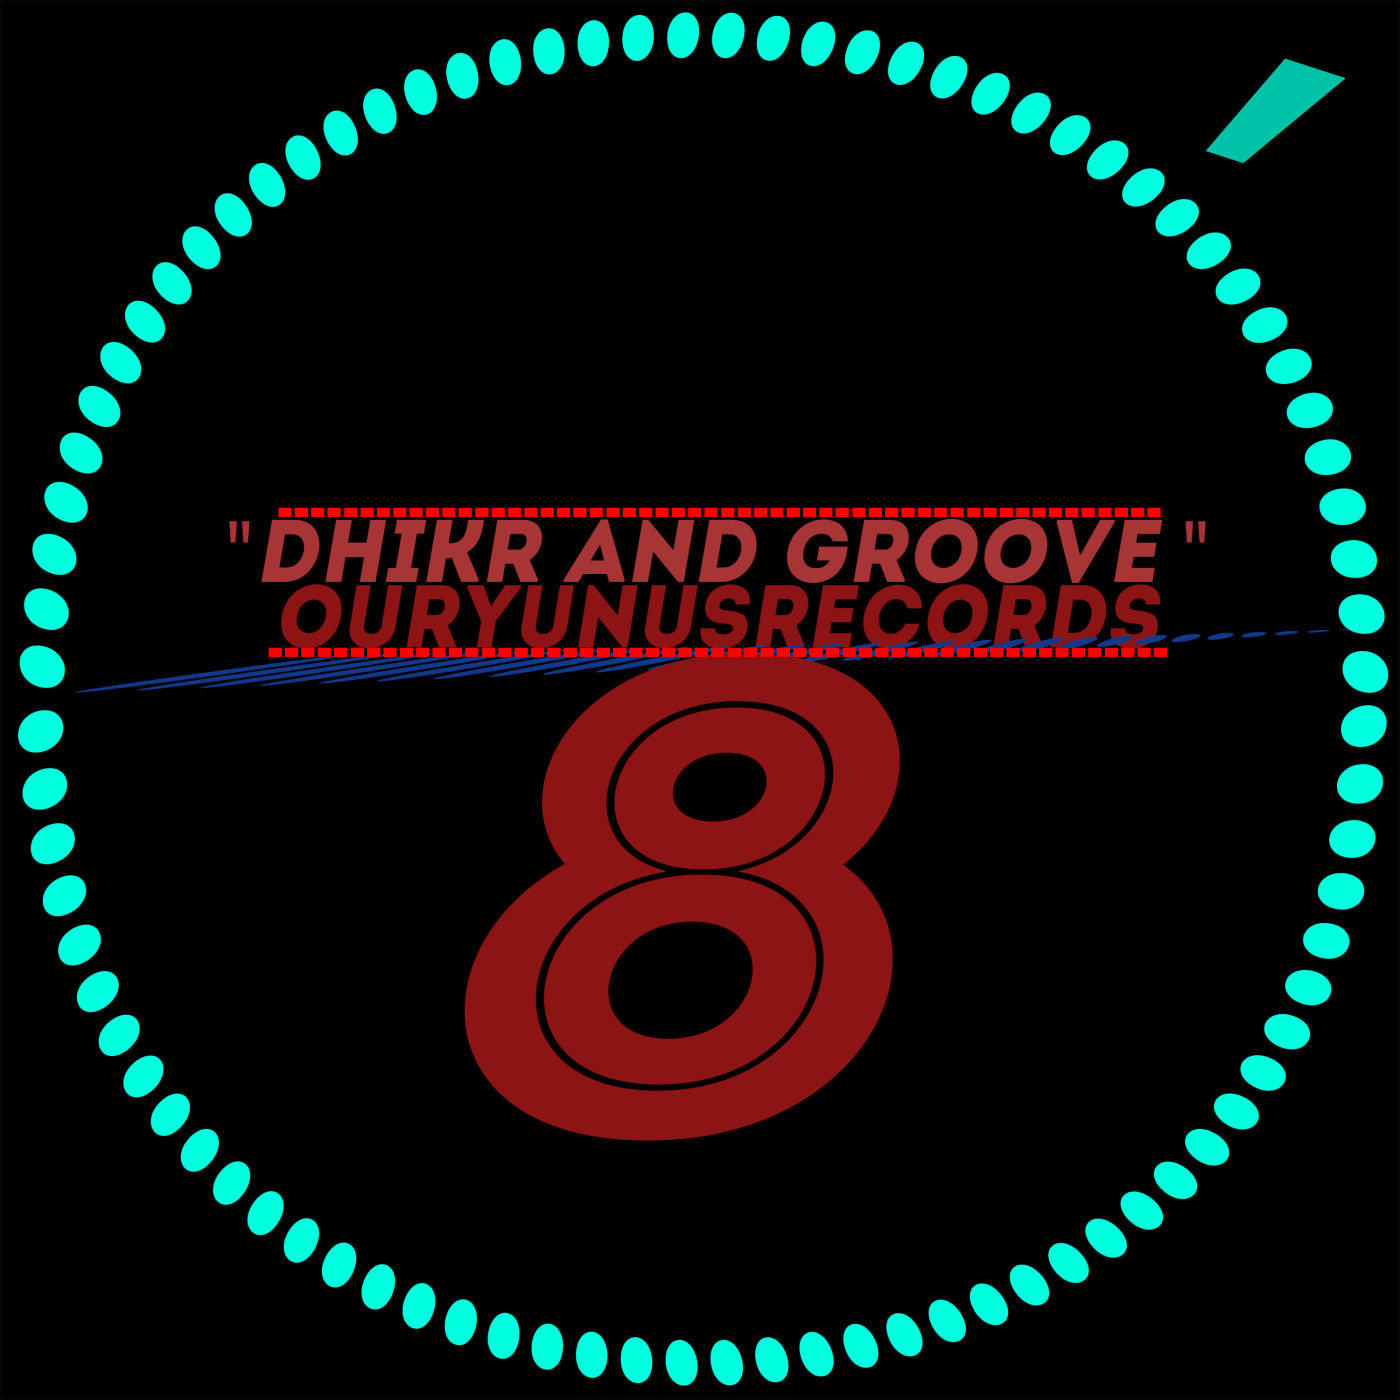 Jonasclean - Dhikr and Groove 8 / Our Yunus Records